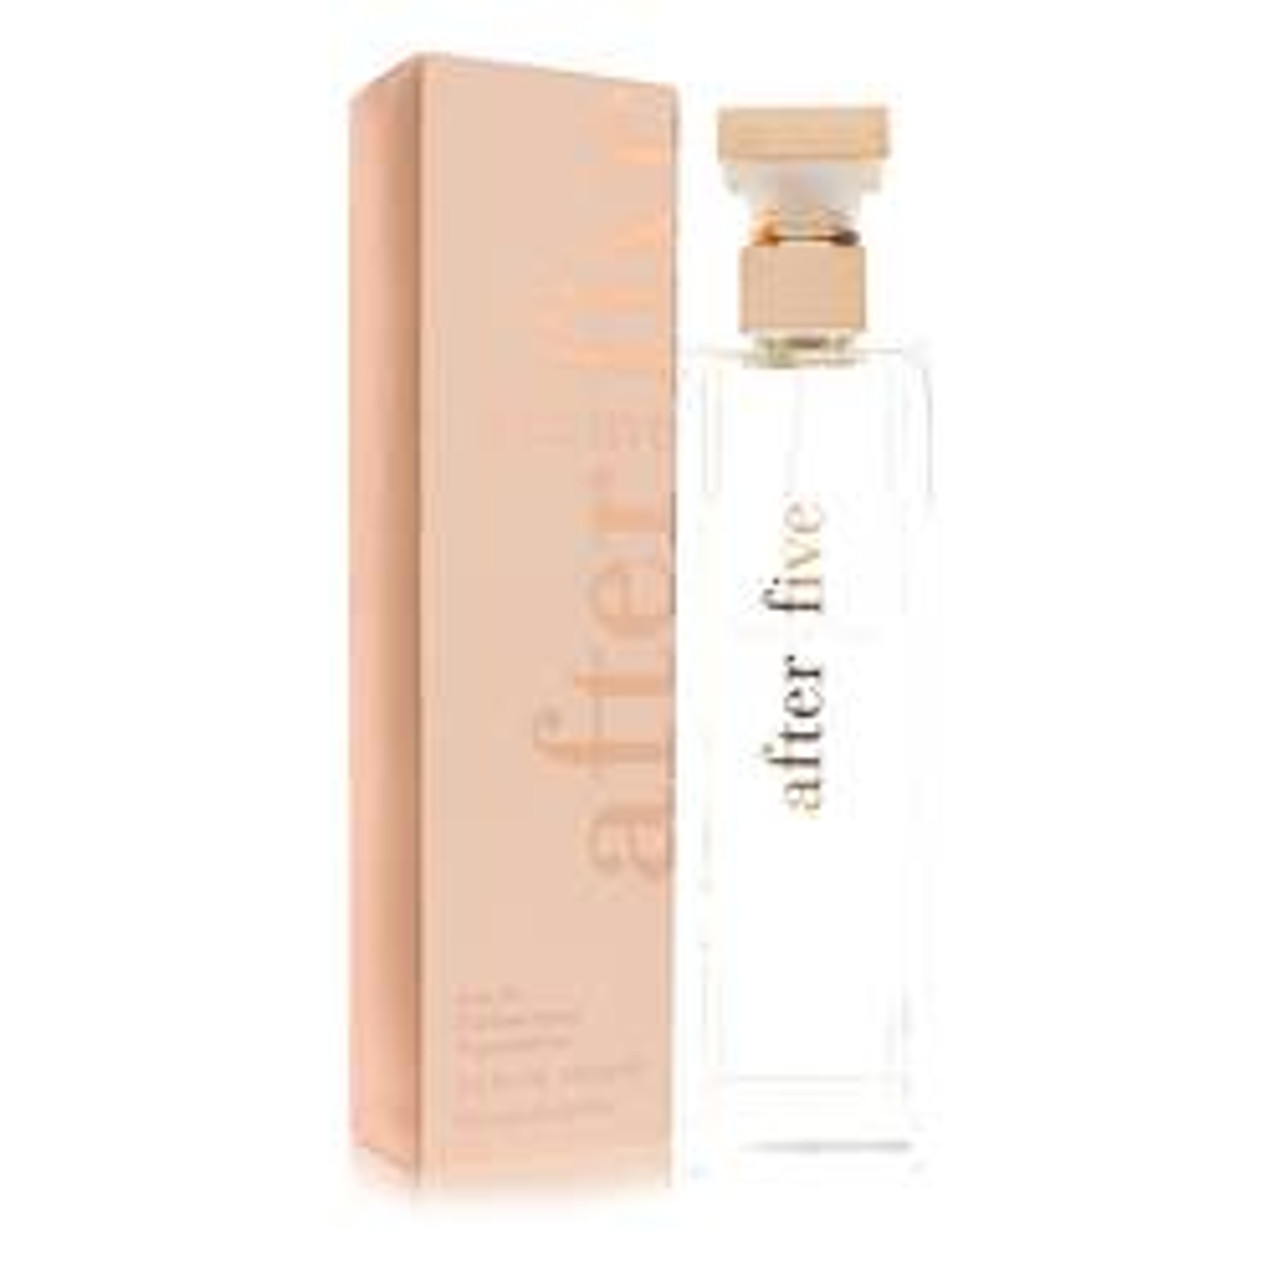 5th Avenue After Five Perfume By Elizabeth Arden Eau De Parfum Spray 4.2 oz for Women - [From 55.00 - Choose pk Qty ] - *Ships from Miami